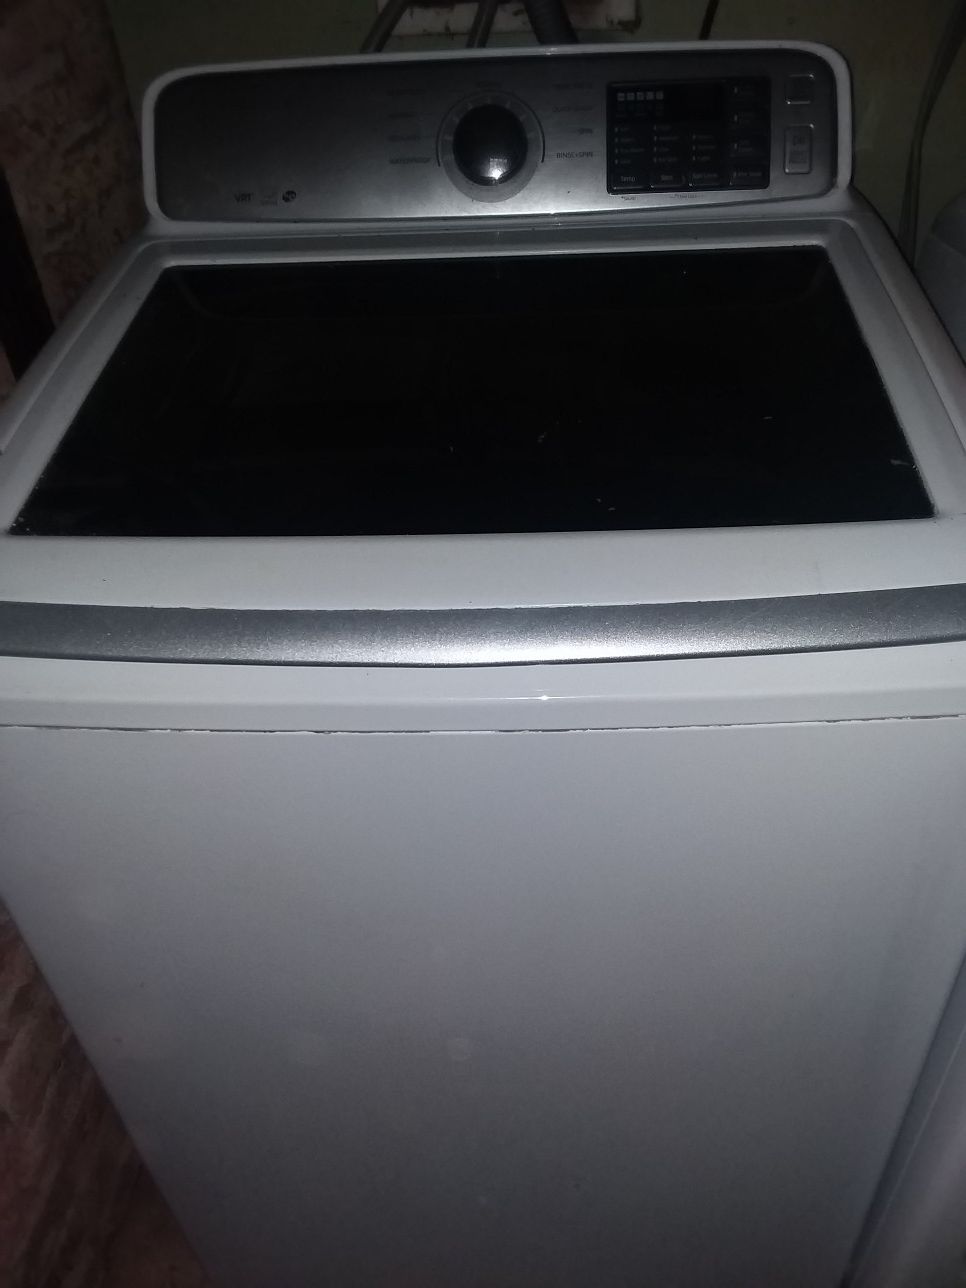 Samsung blue tooth washer and dryer only 1 year few months old